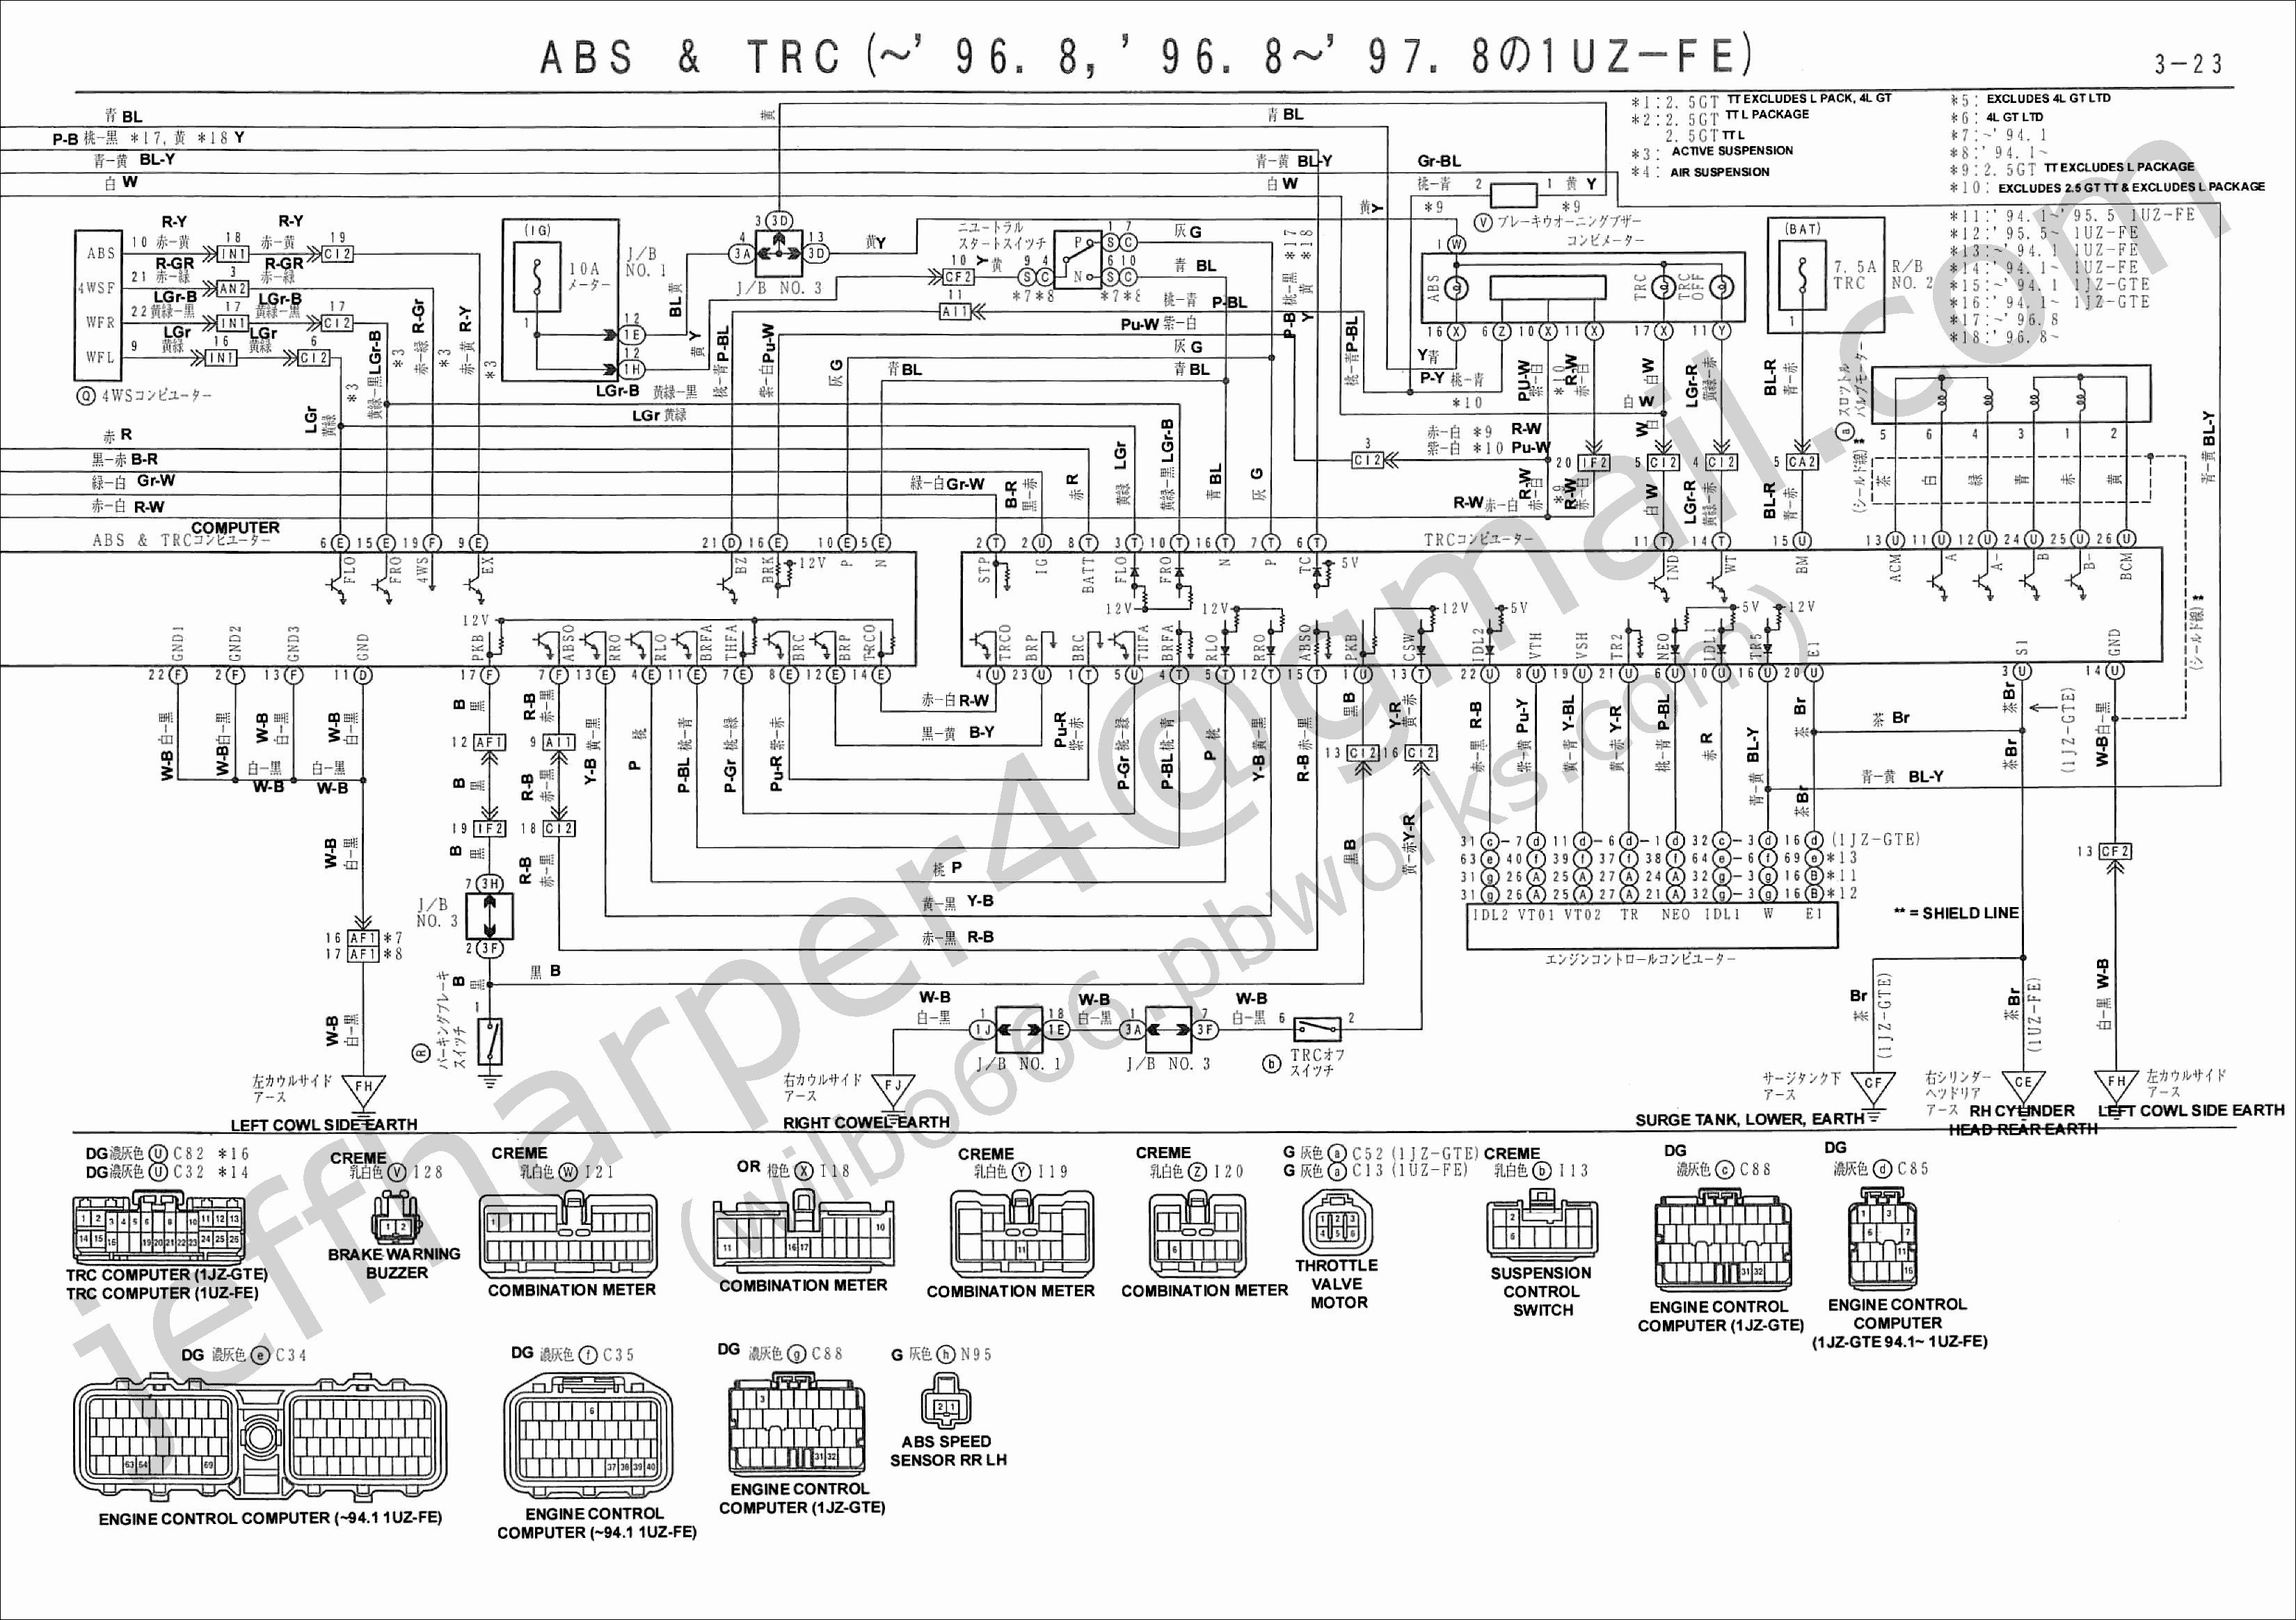 Electrical Wiring Diagrams for Cars Electrical Wiring Diagrams for Dummies Beautiful Reading Electrical Of Electrical Wiring Diagrams for Cars